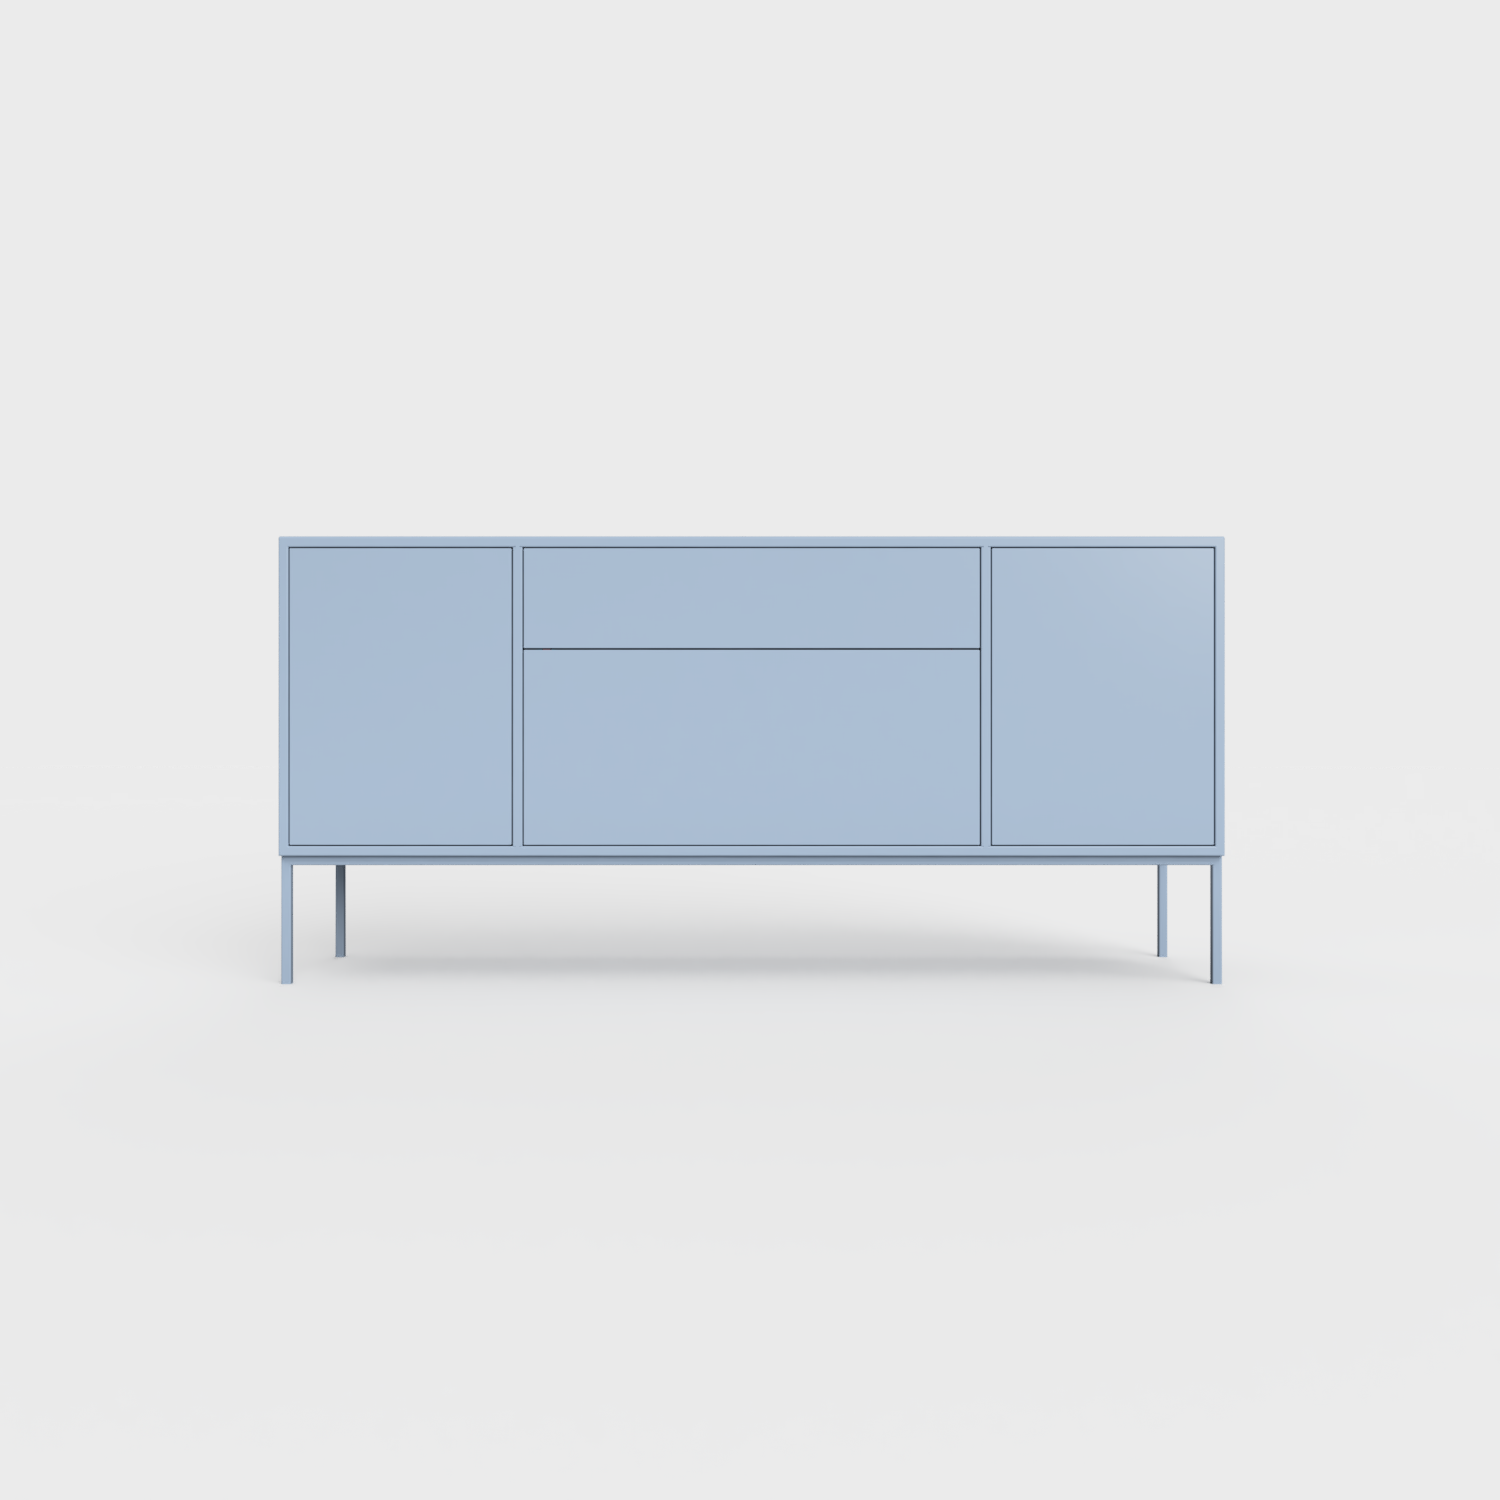 Arnika 02 Sideboard in Pigeon Blue color, powder-coated steel, elegant and modern piece of furniture for your living room